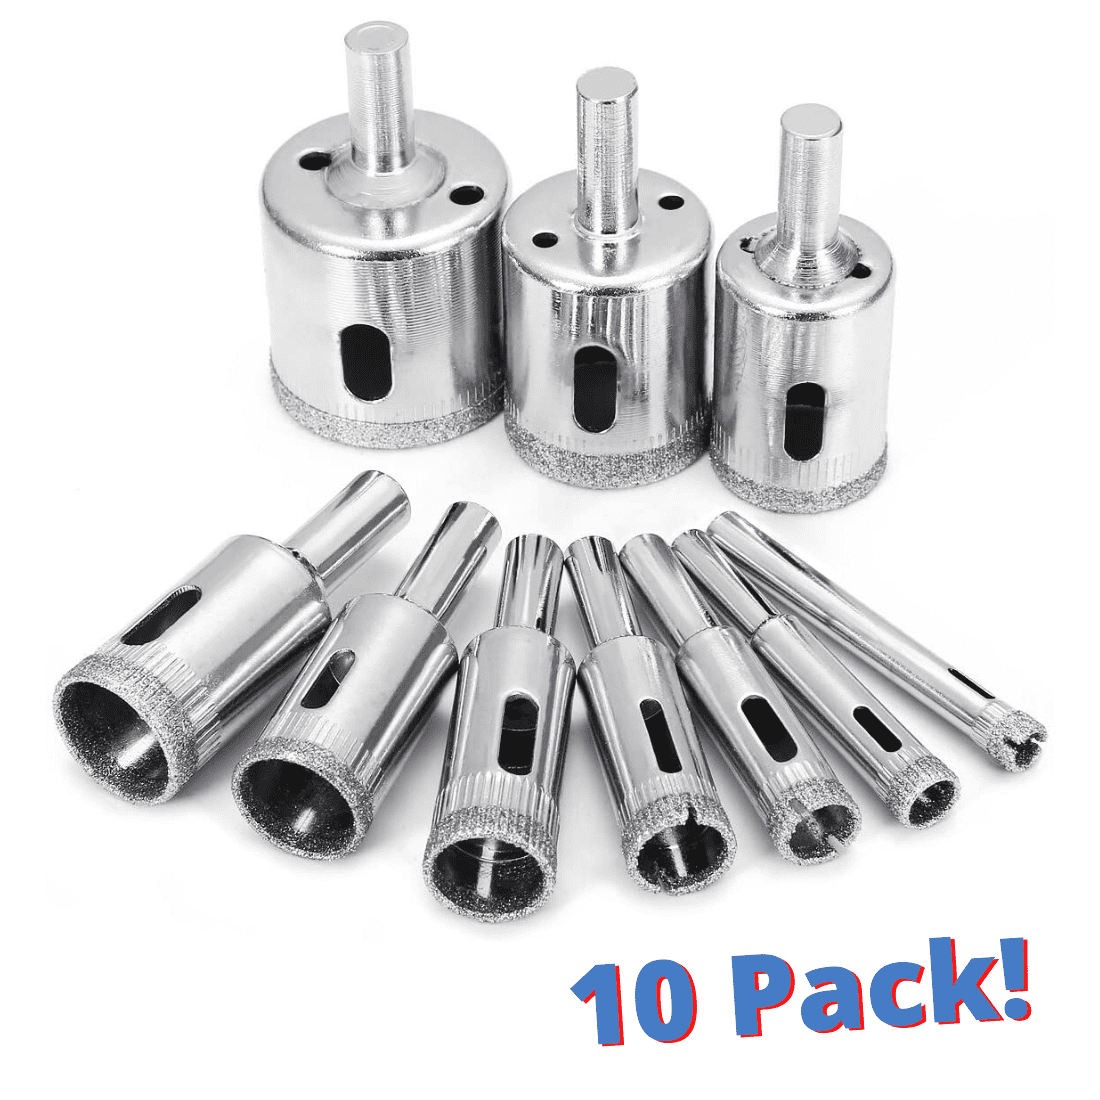 15PC 6-50mm Diamond Tool Glass Drill Bit Hole Saw Cutter for Tile Marble Ceramic